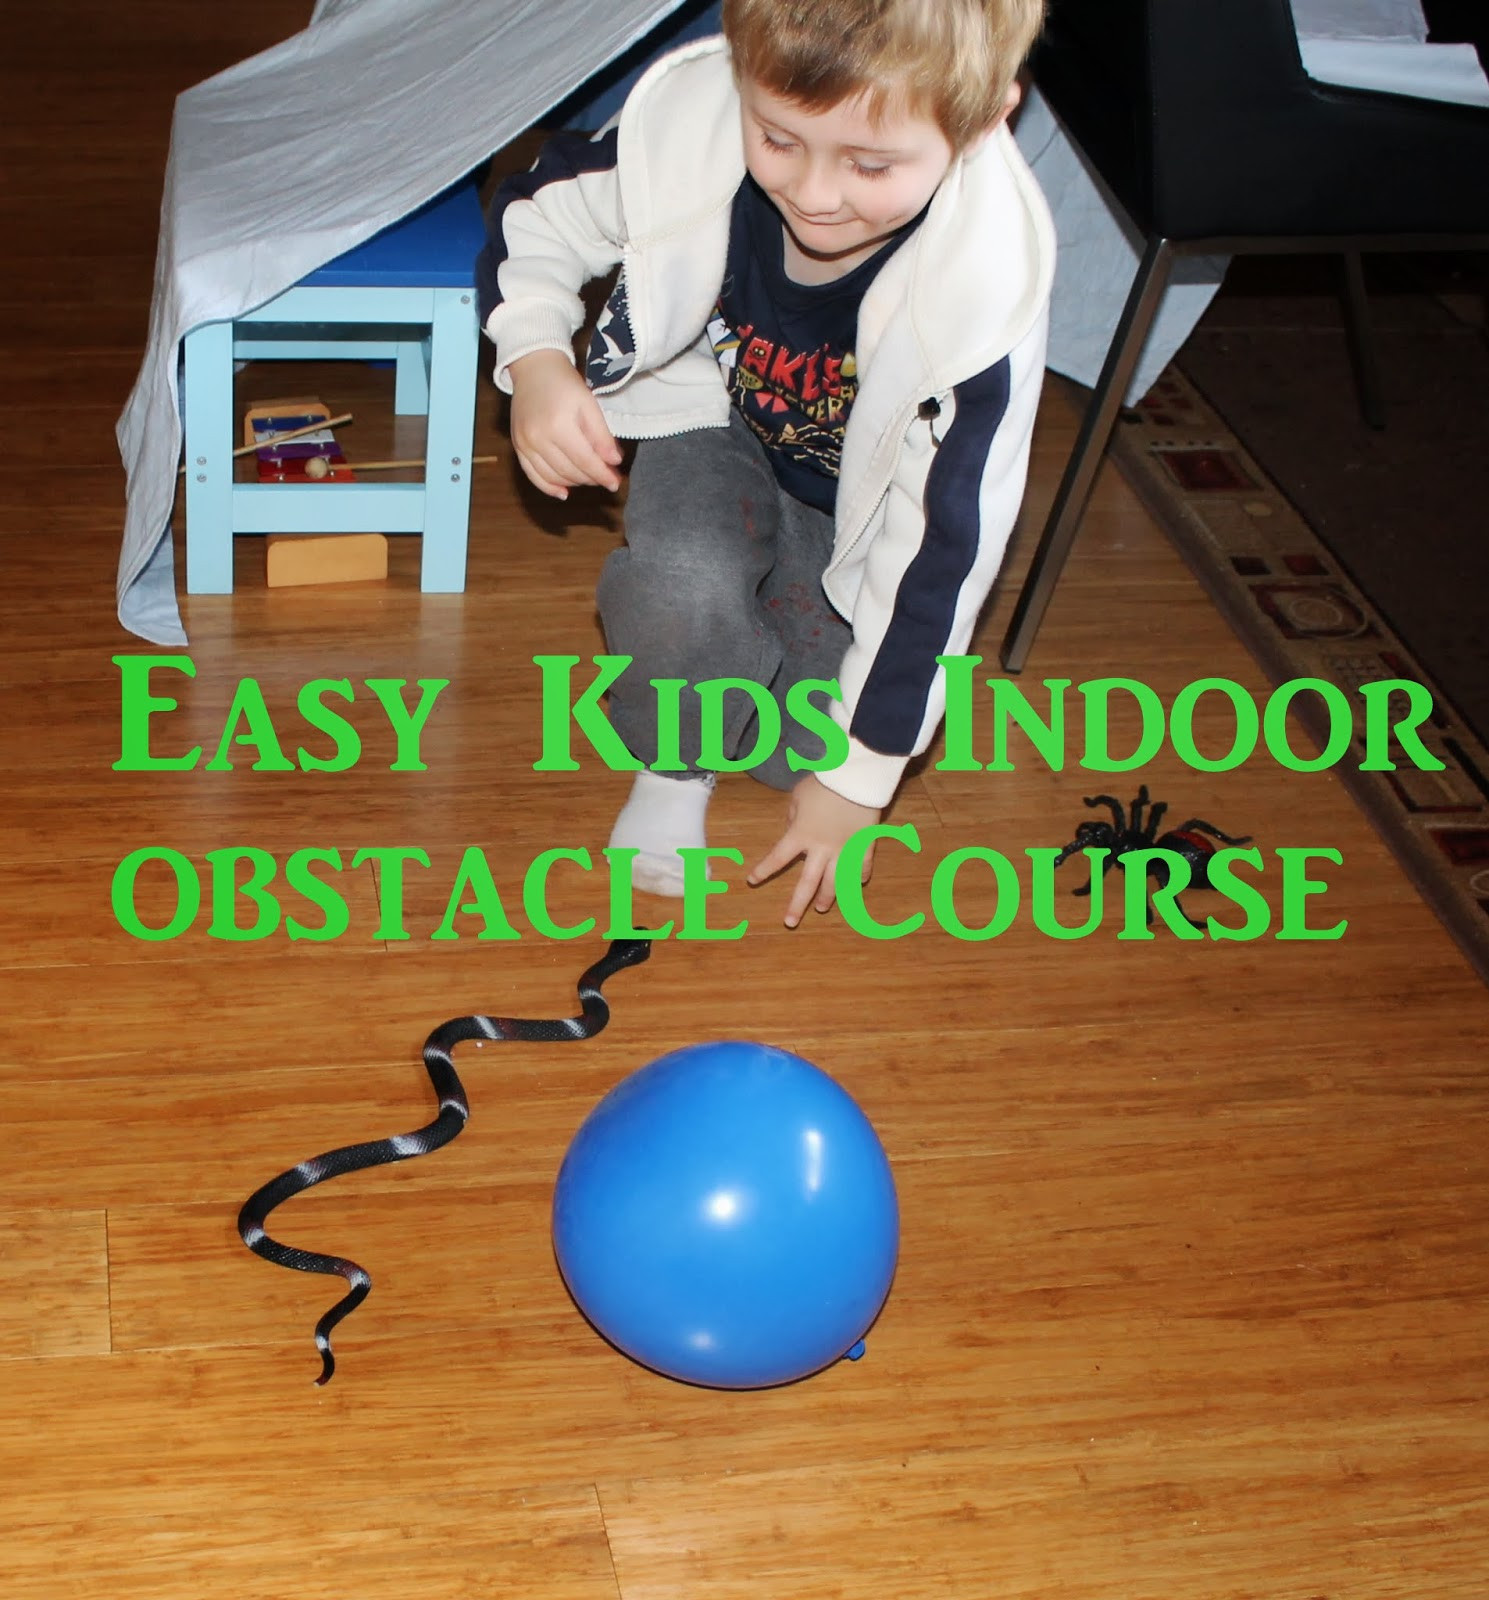 Kids Indoor Obstacle Course
 Adventures at home with Mum Easy Kids Indoor Obstacle Course